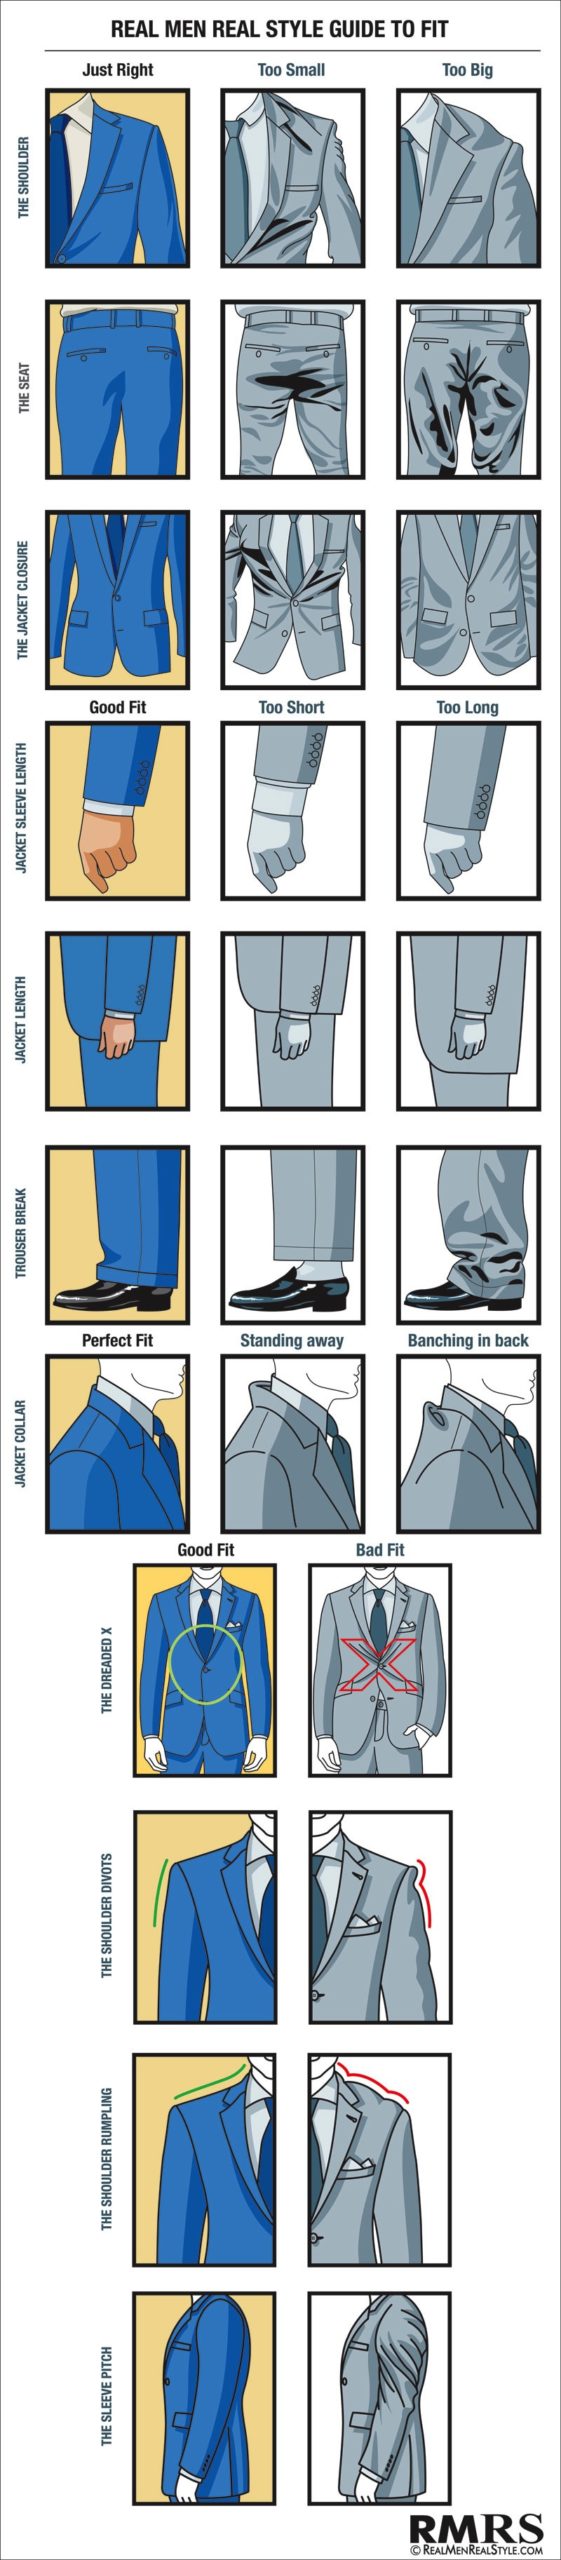 This Visual Guide Outlines How Men’s Suits Should Fit